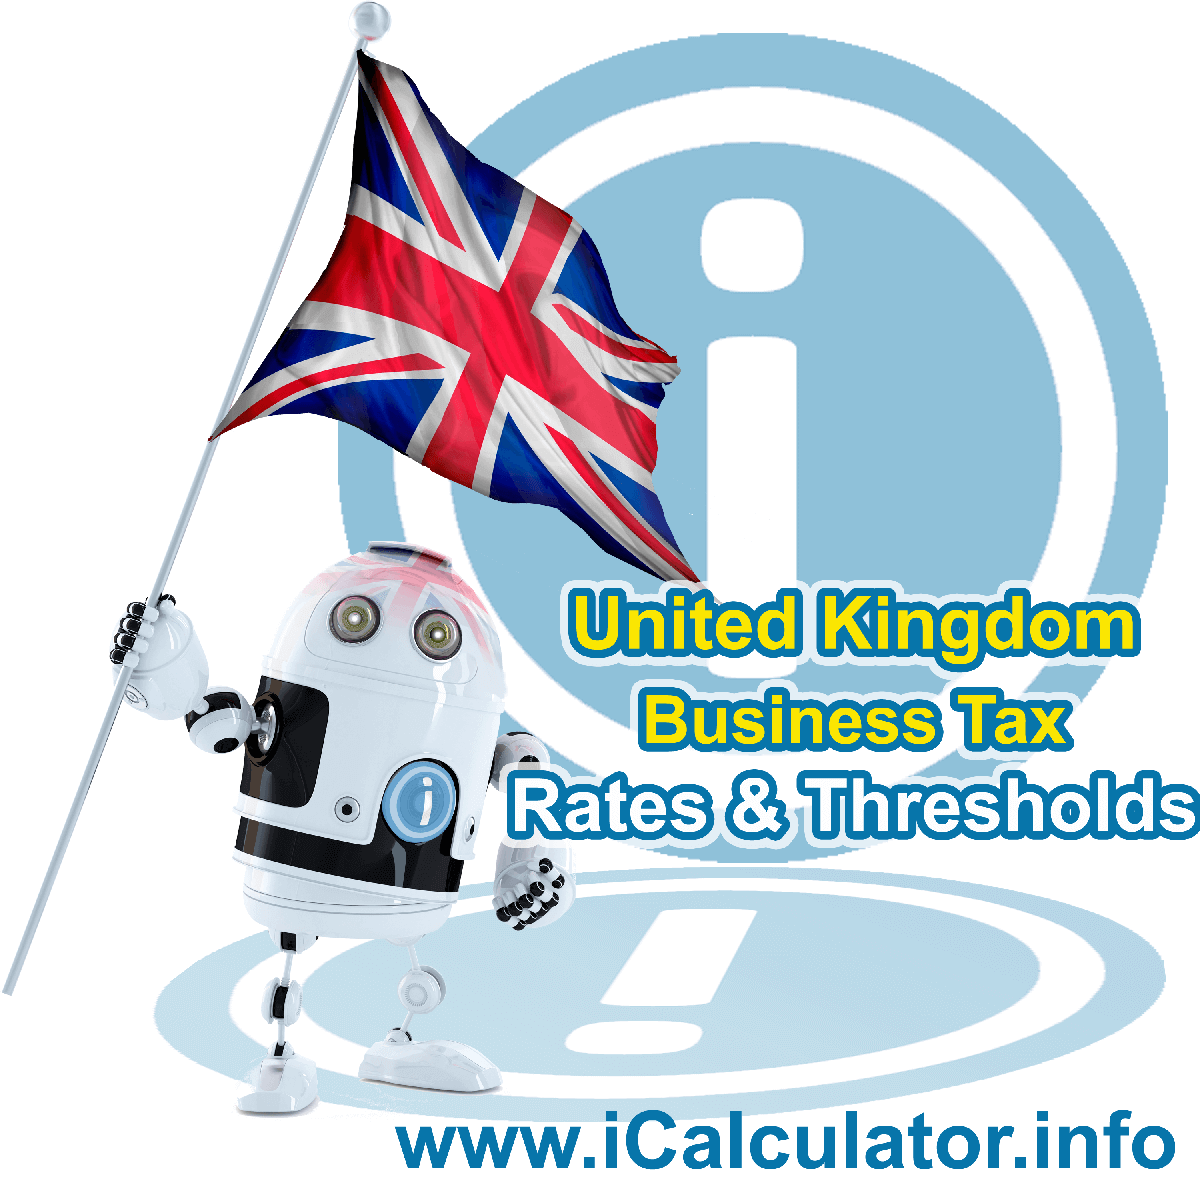 United Kingdom Corporation Tax Rates in 2017. This image shows the United Kingdom flag and information relating to the corporation tax formula for the United Kingdom Corporation Tax Calculator in 2017